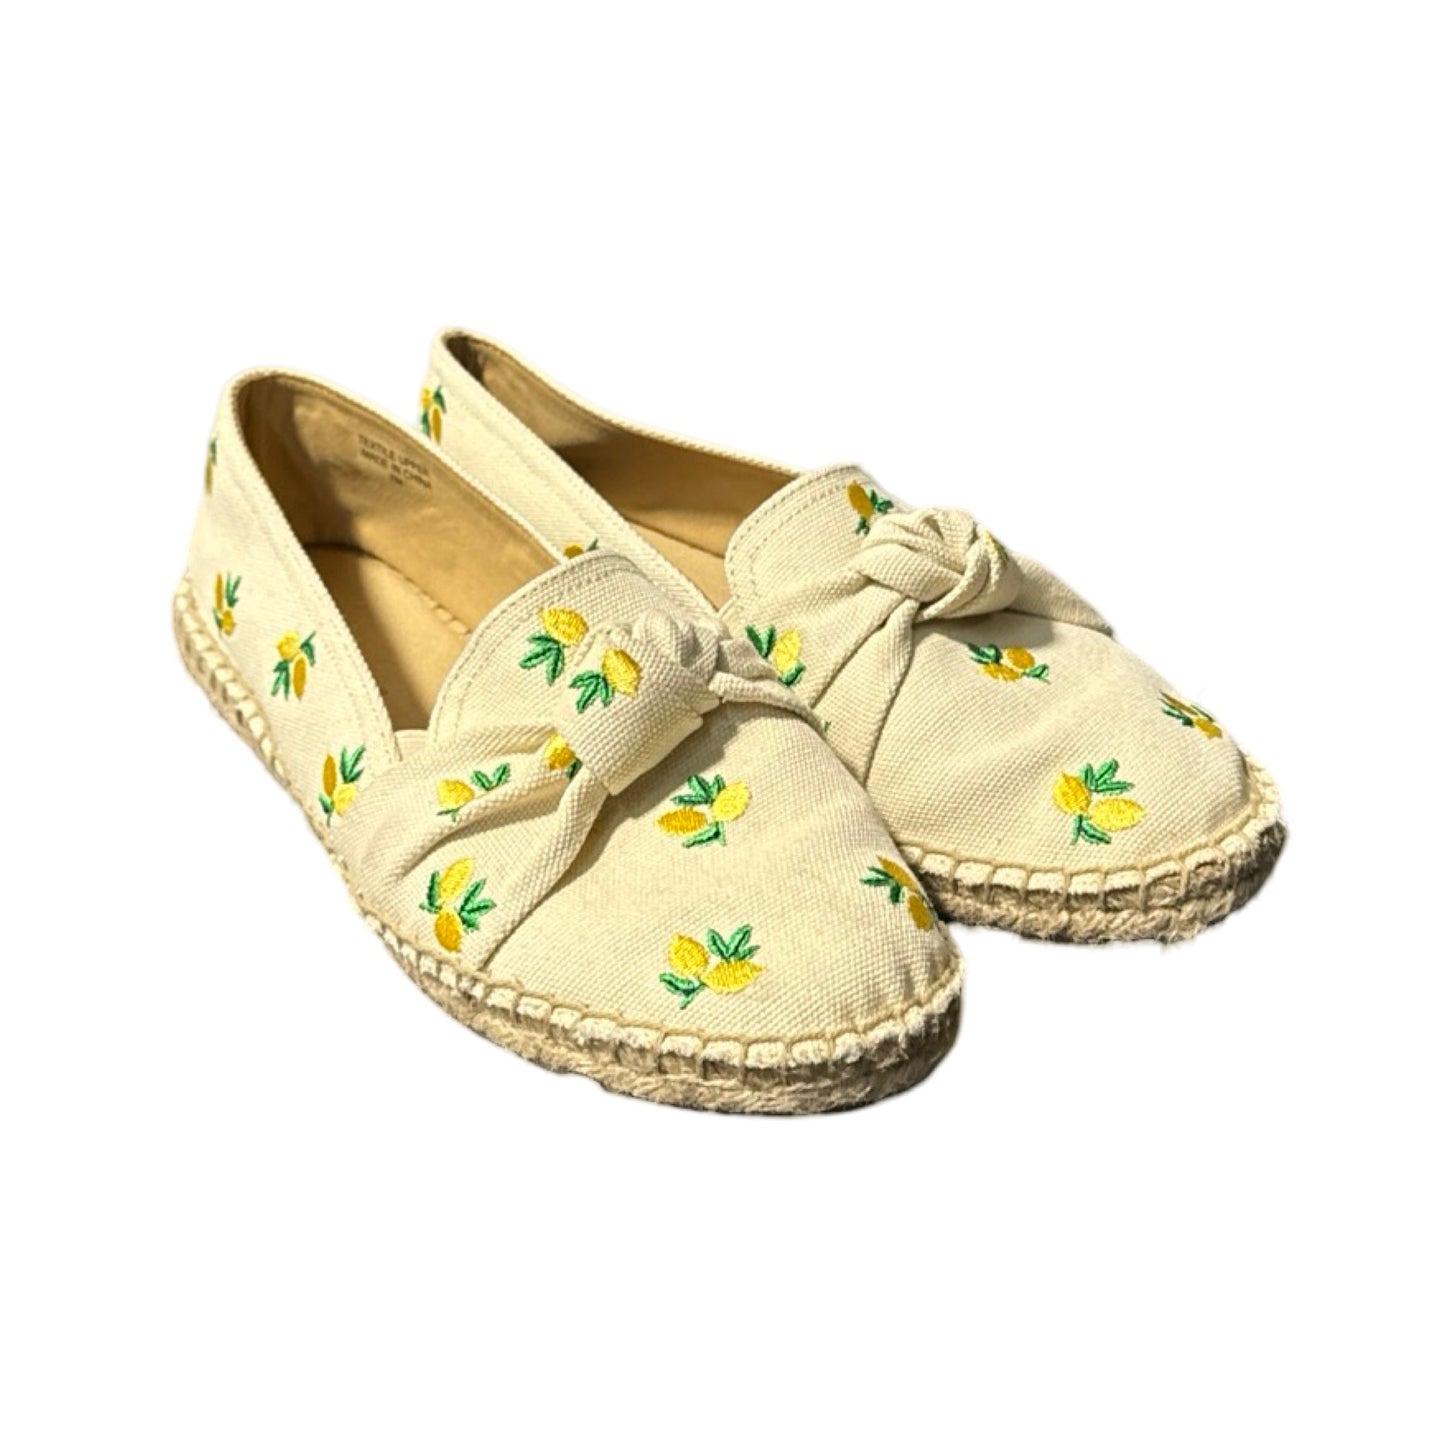 Cream & Green Shoes Flats Talbots, Size 7